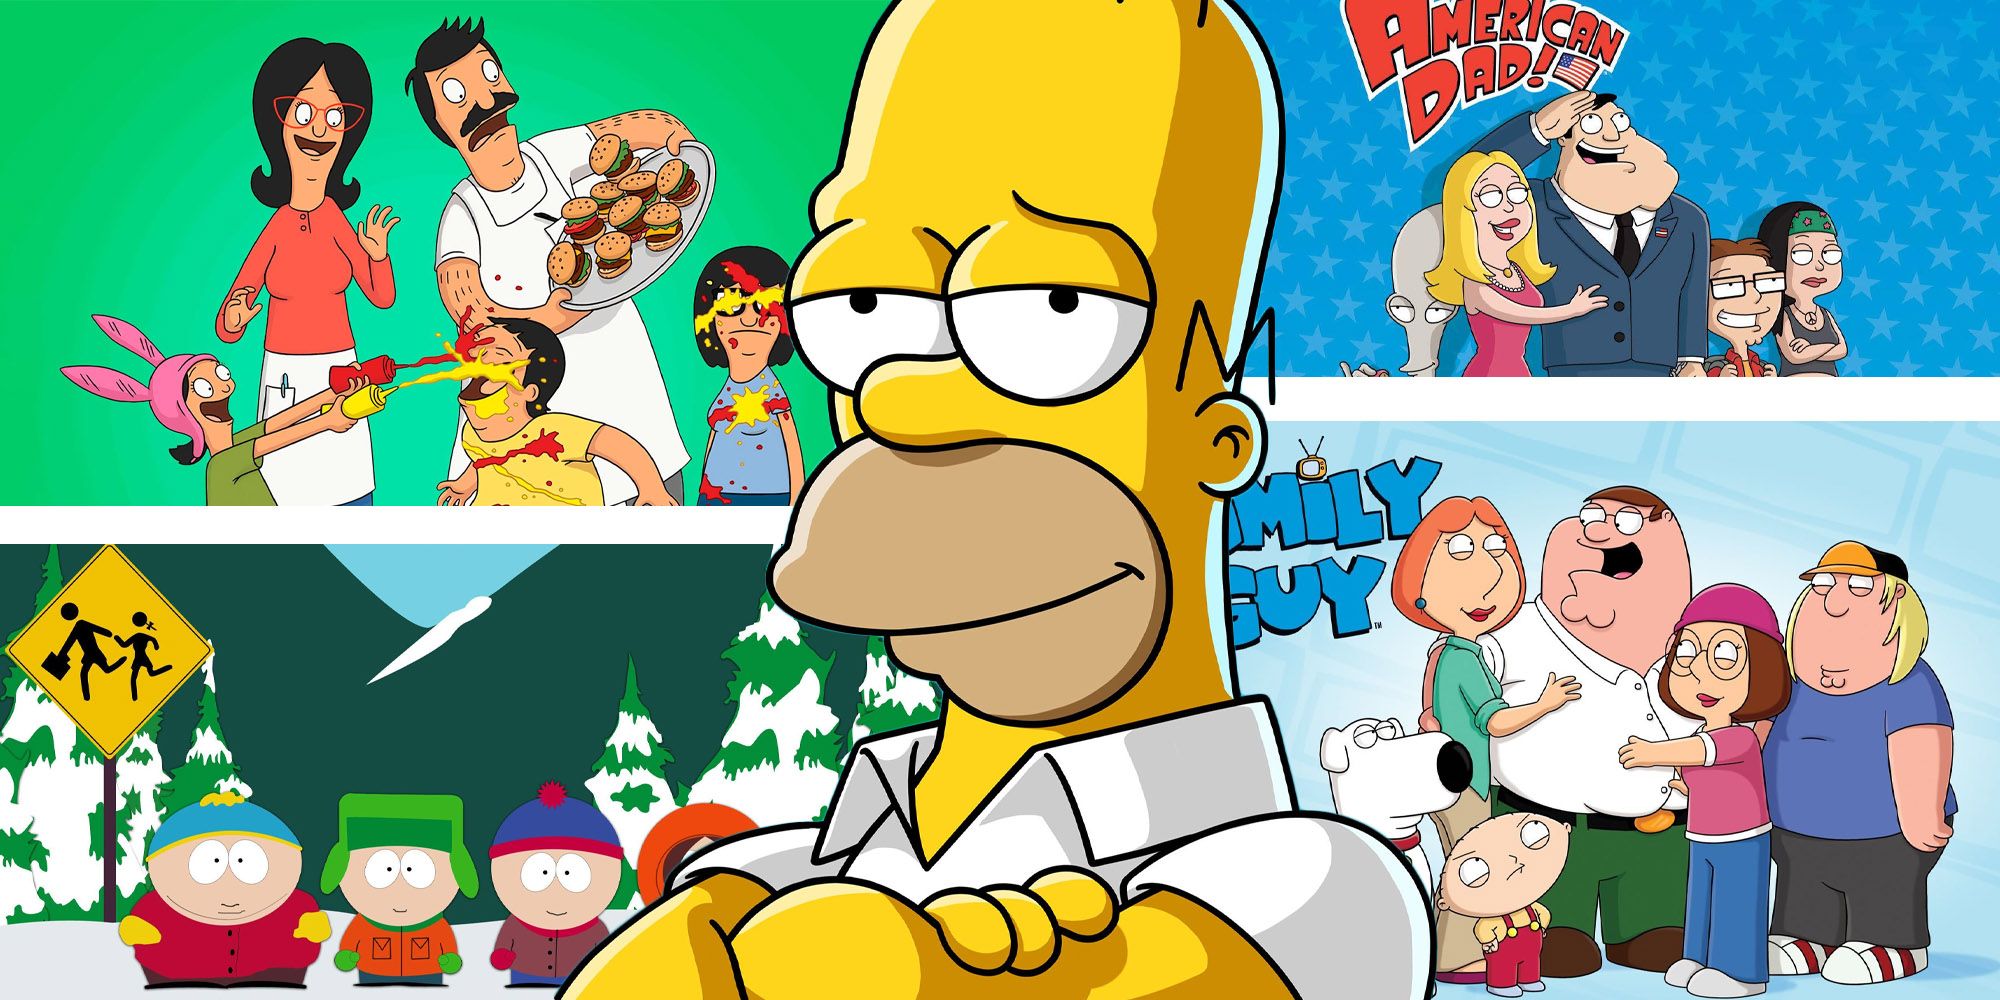 How The Simpsons Influenced Every Major Animated Adult Comedy